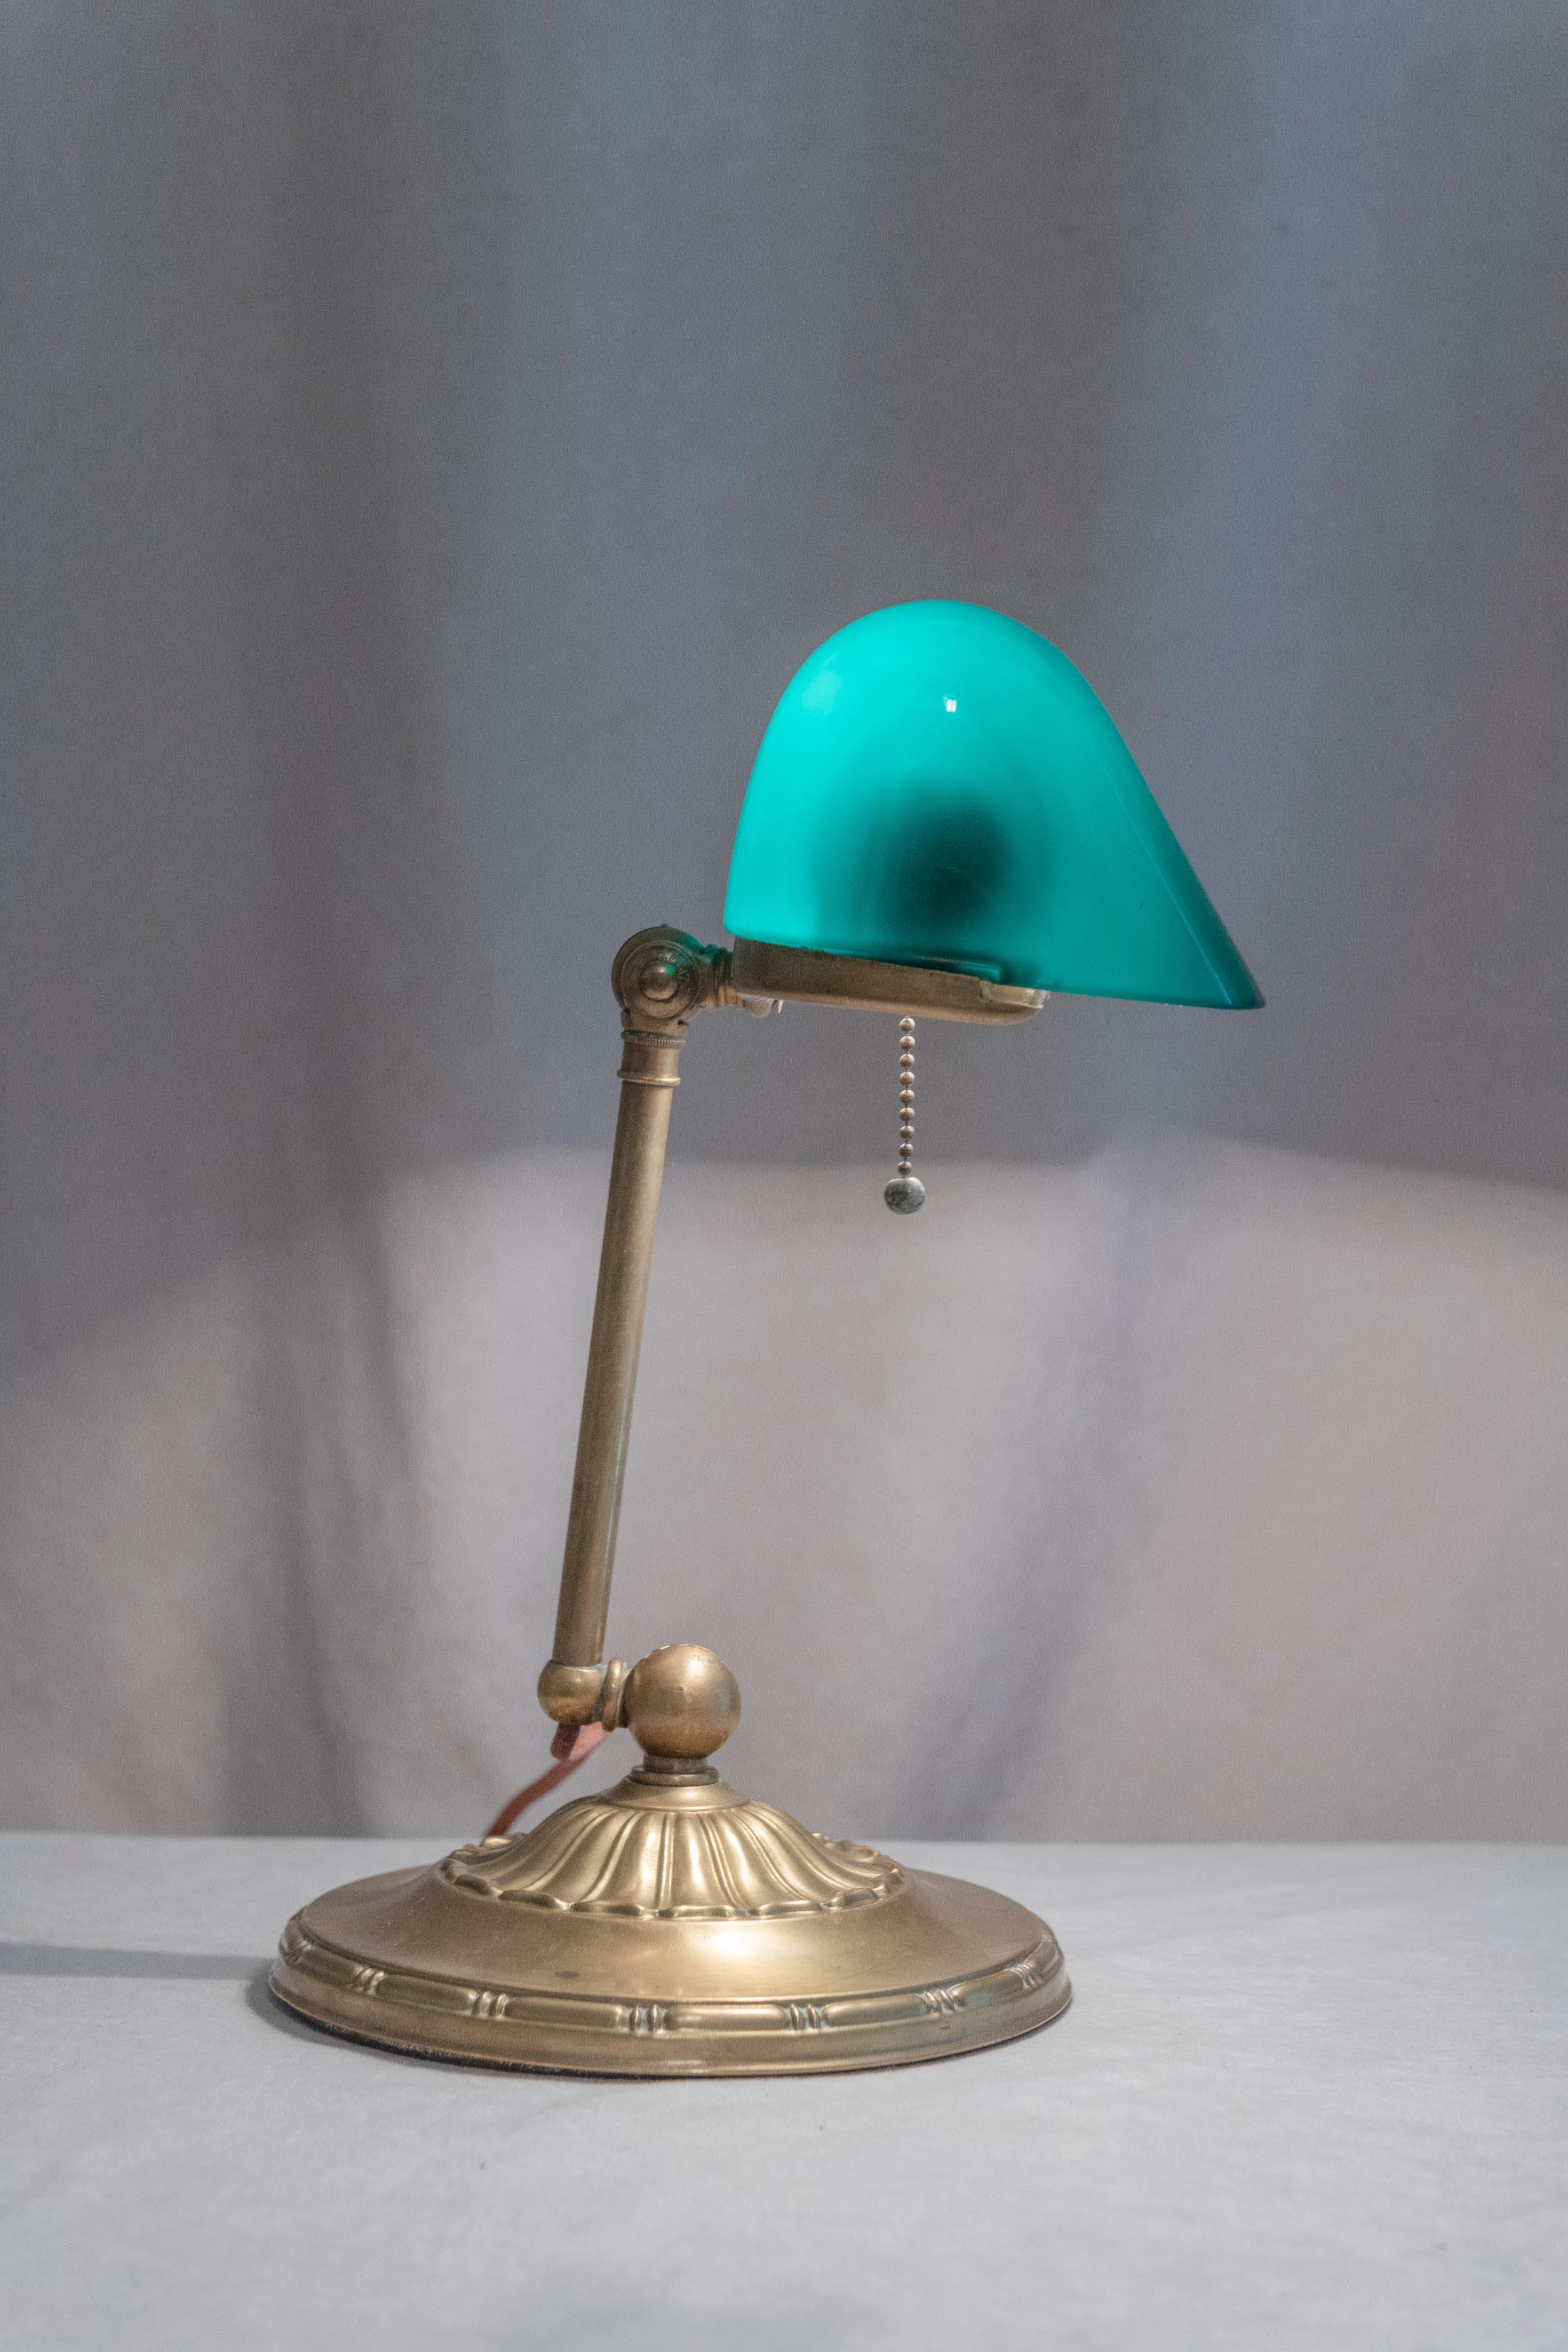  These lamps which have come to b known as banker's lamps are the most popular antique lamp for use on one's desk. Emeralite, the maker of this lamp is by far the most well known. Signed inside the the back of the shade as well as on the underside